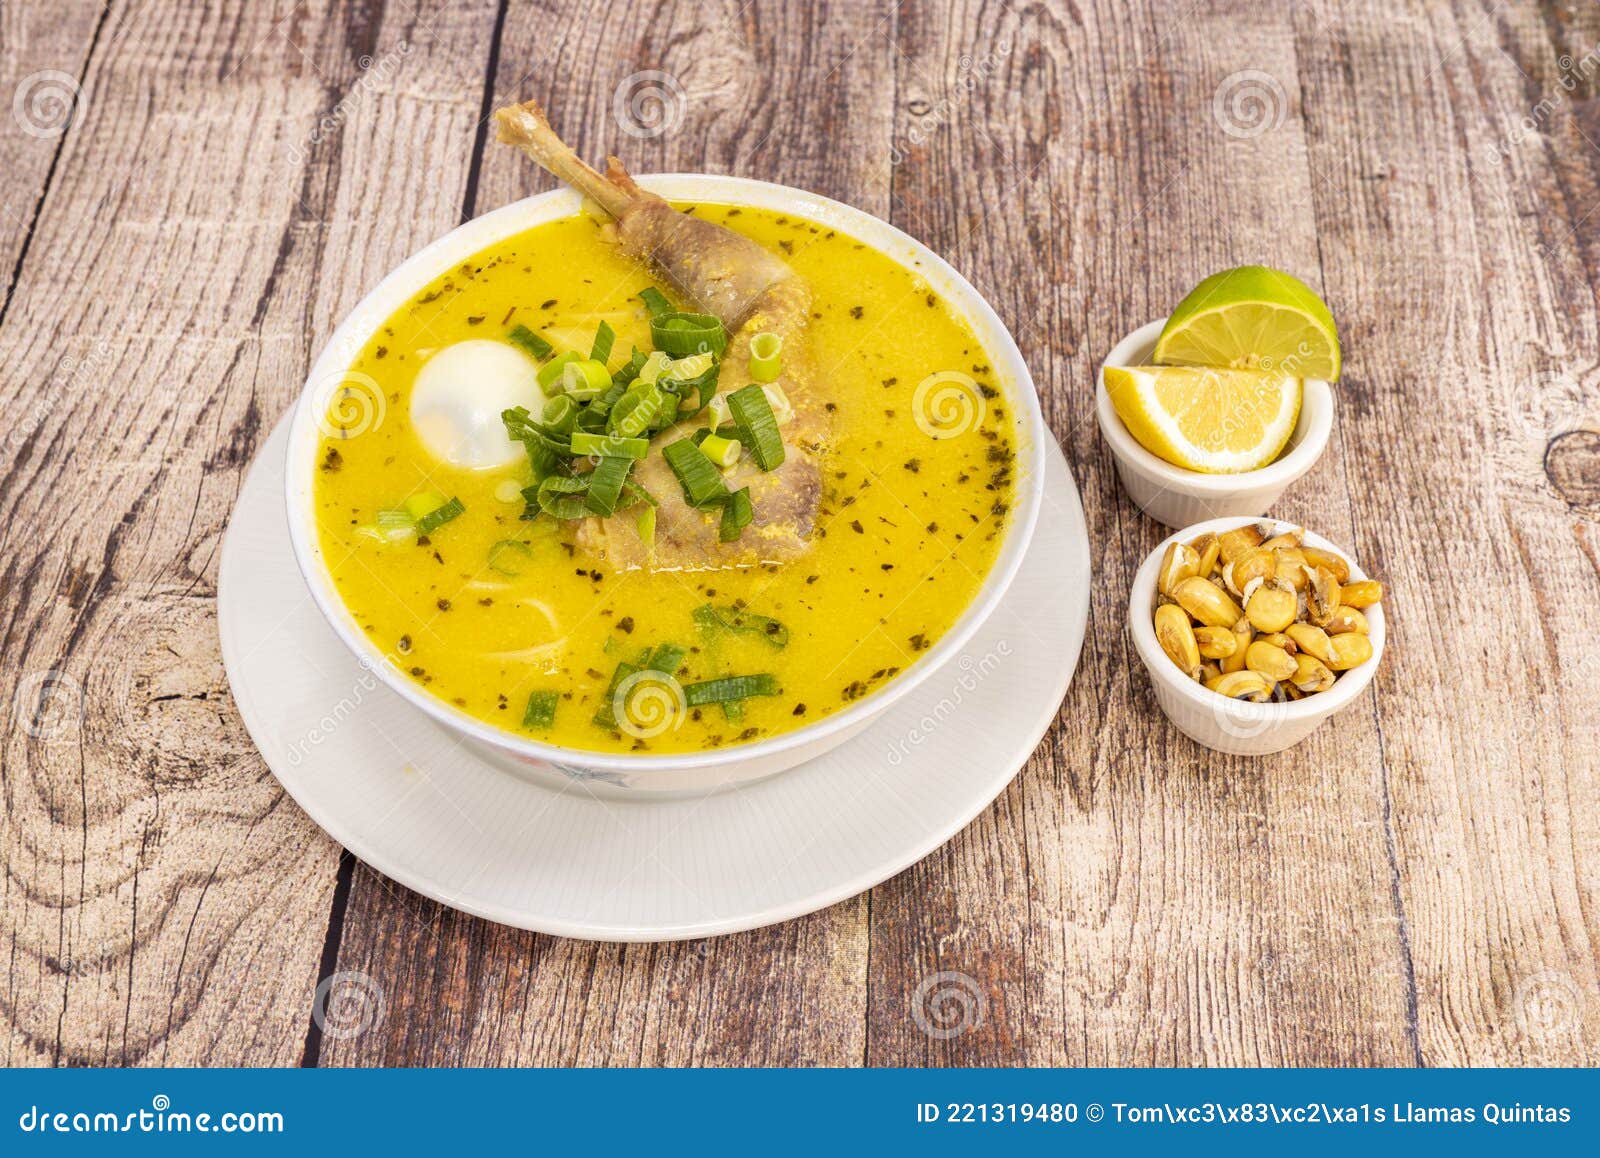 old chicken broth with typical peruvian recipe accompanied by a bit of cancha and slices of lime and lemon